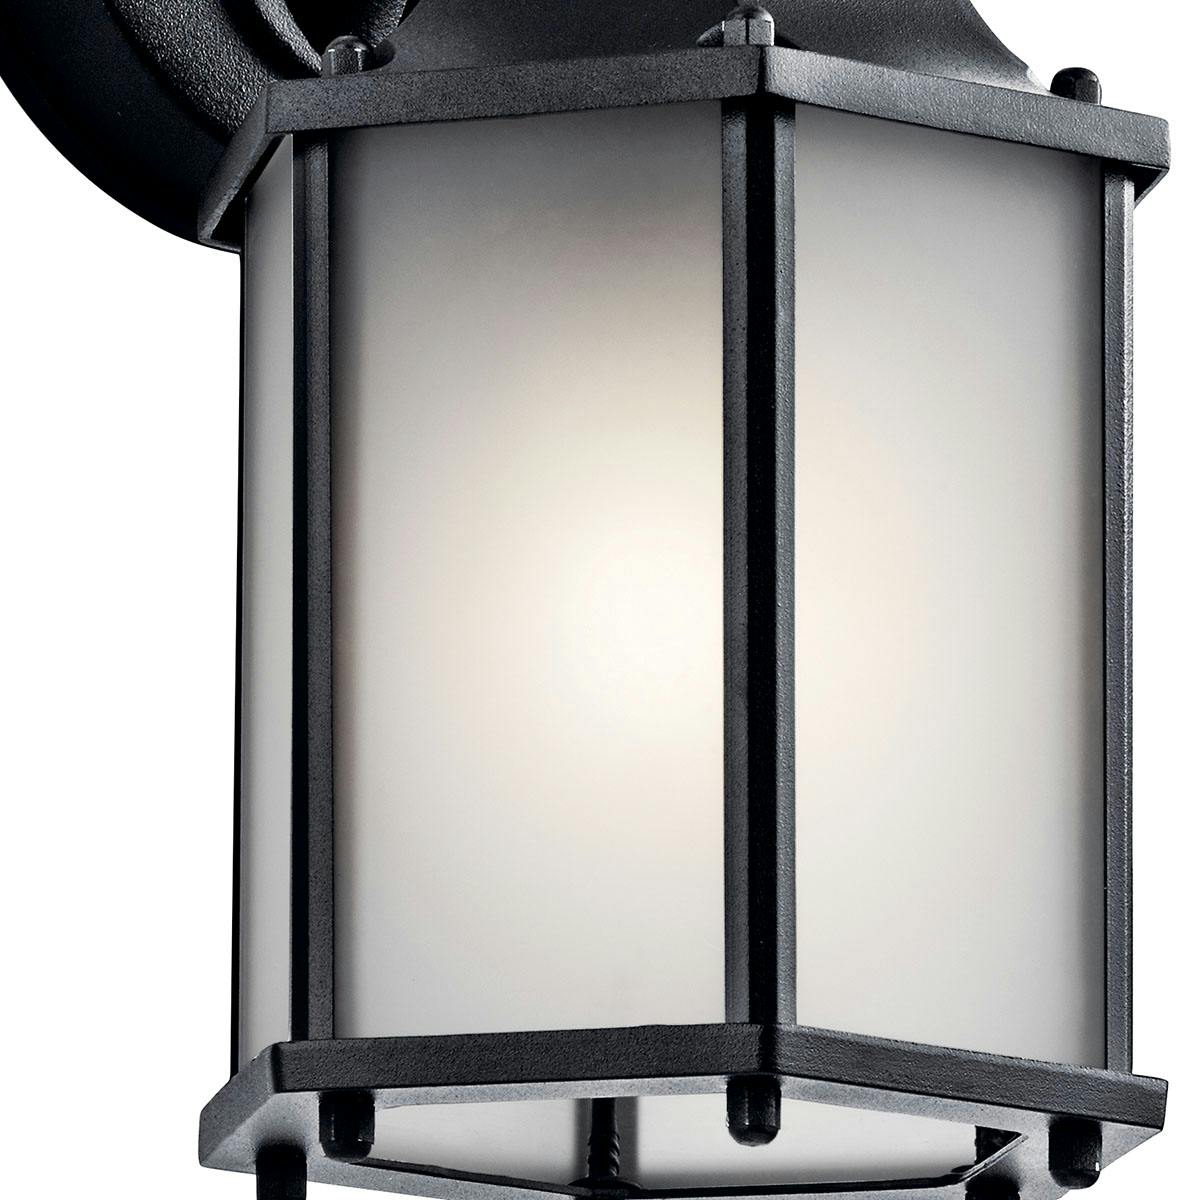 Close up view of the Chesapeake 10.25" Wall Light in Black on a white background